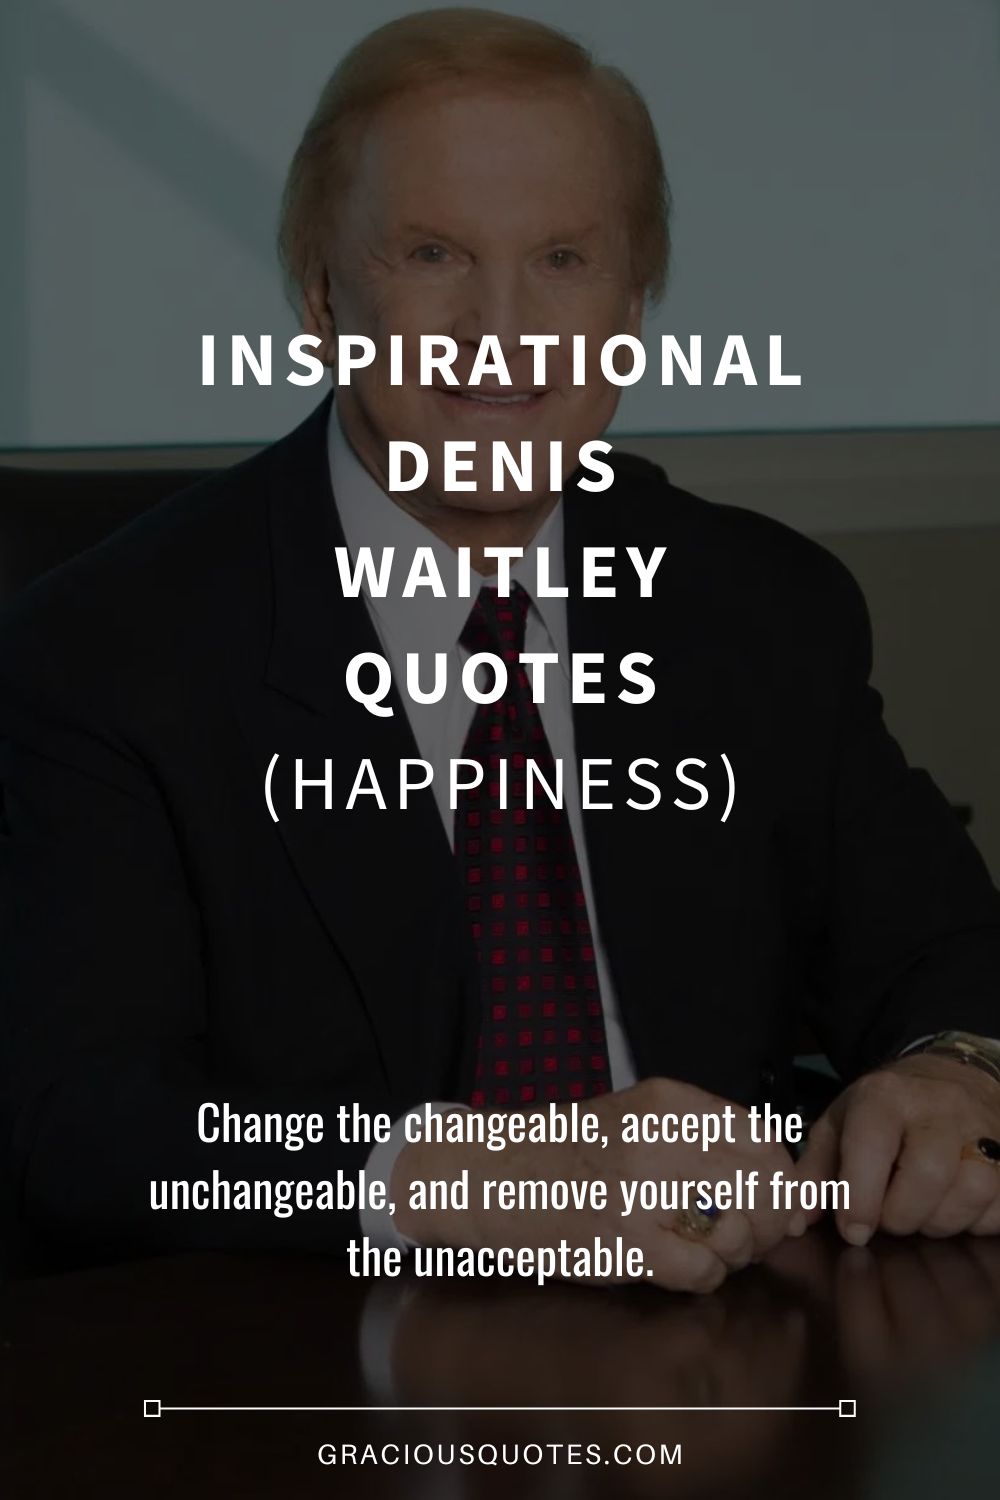 Inspirational Denis Waitley Quotes HAPPINESS Gracious Quotes